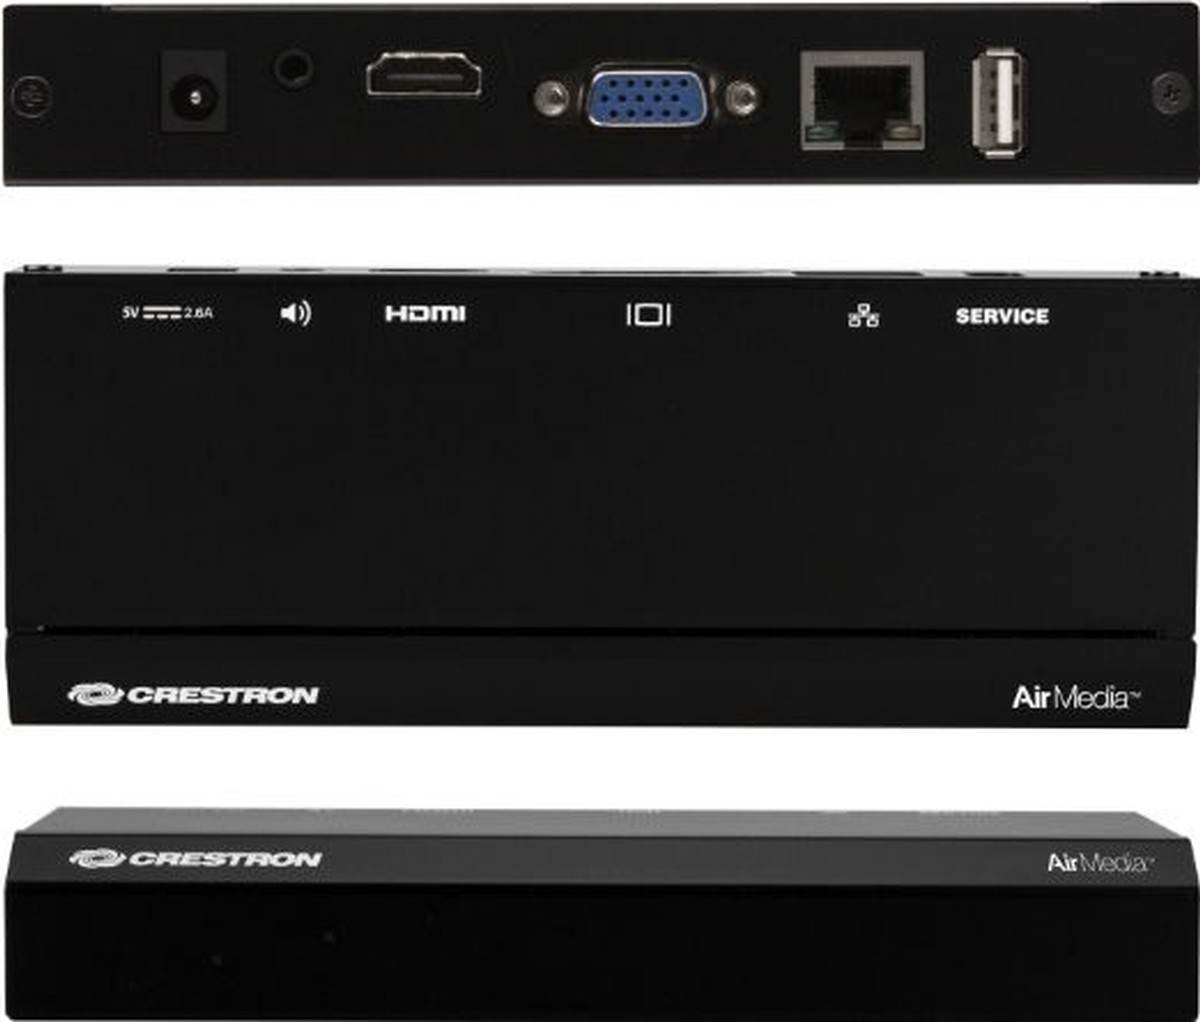 how many devices can connect to airmedia crestron